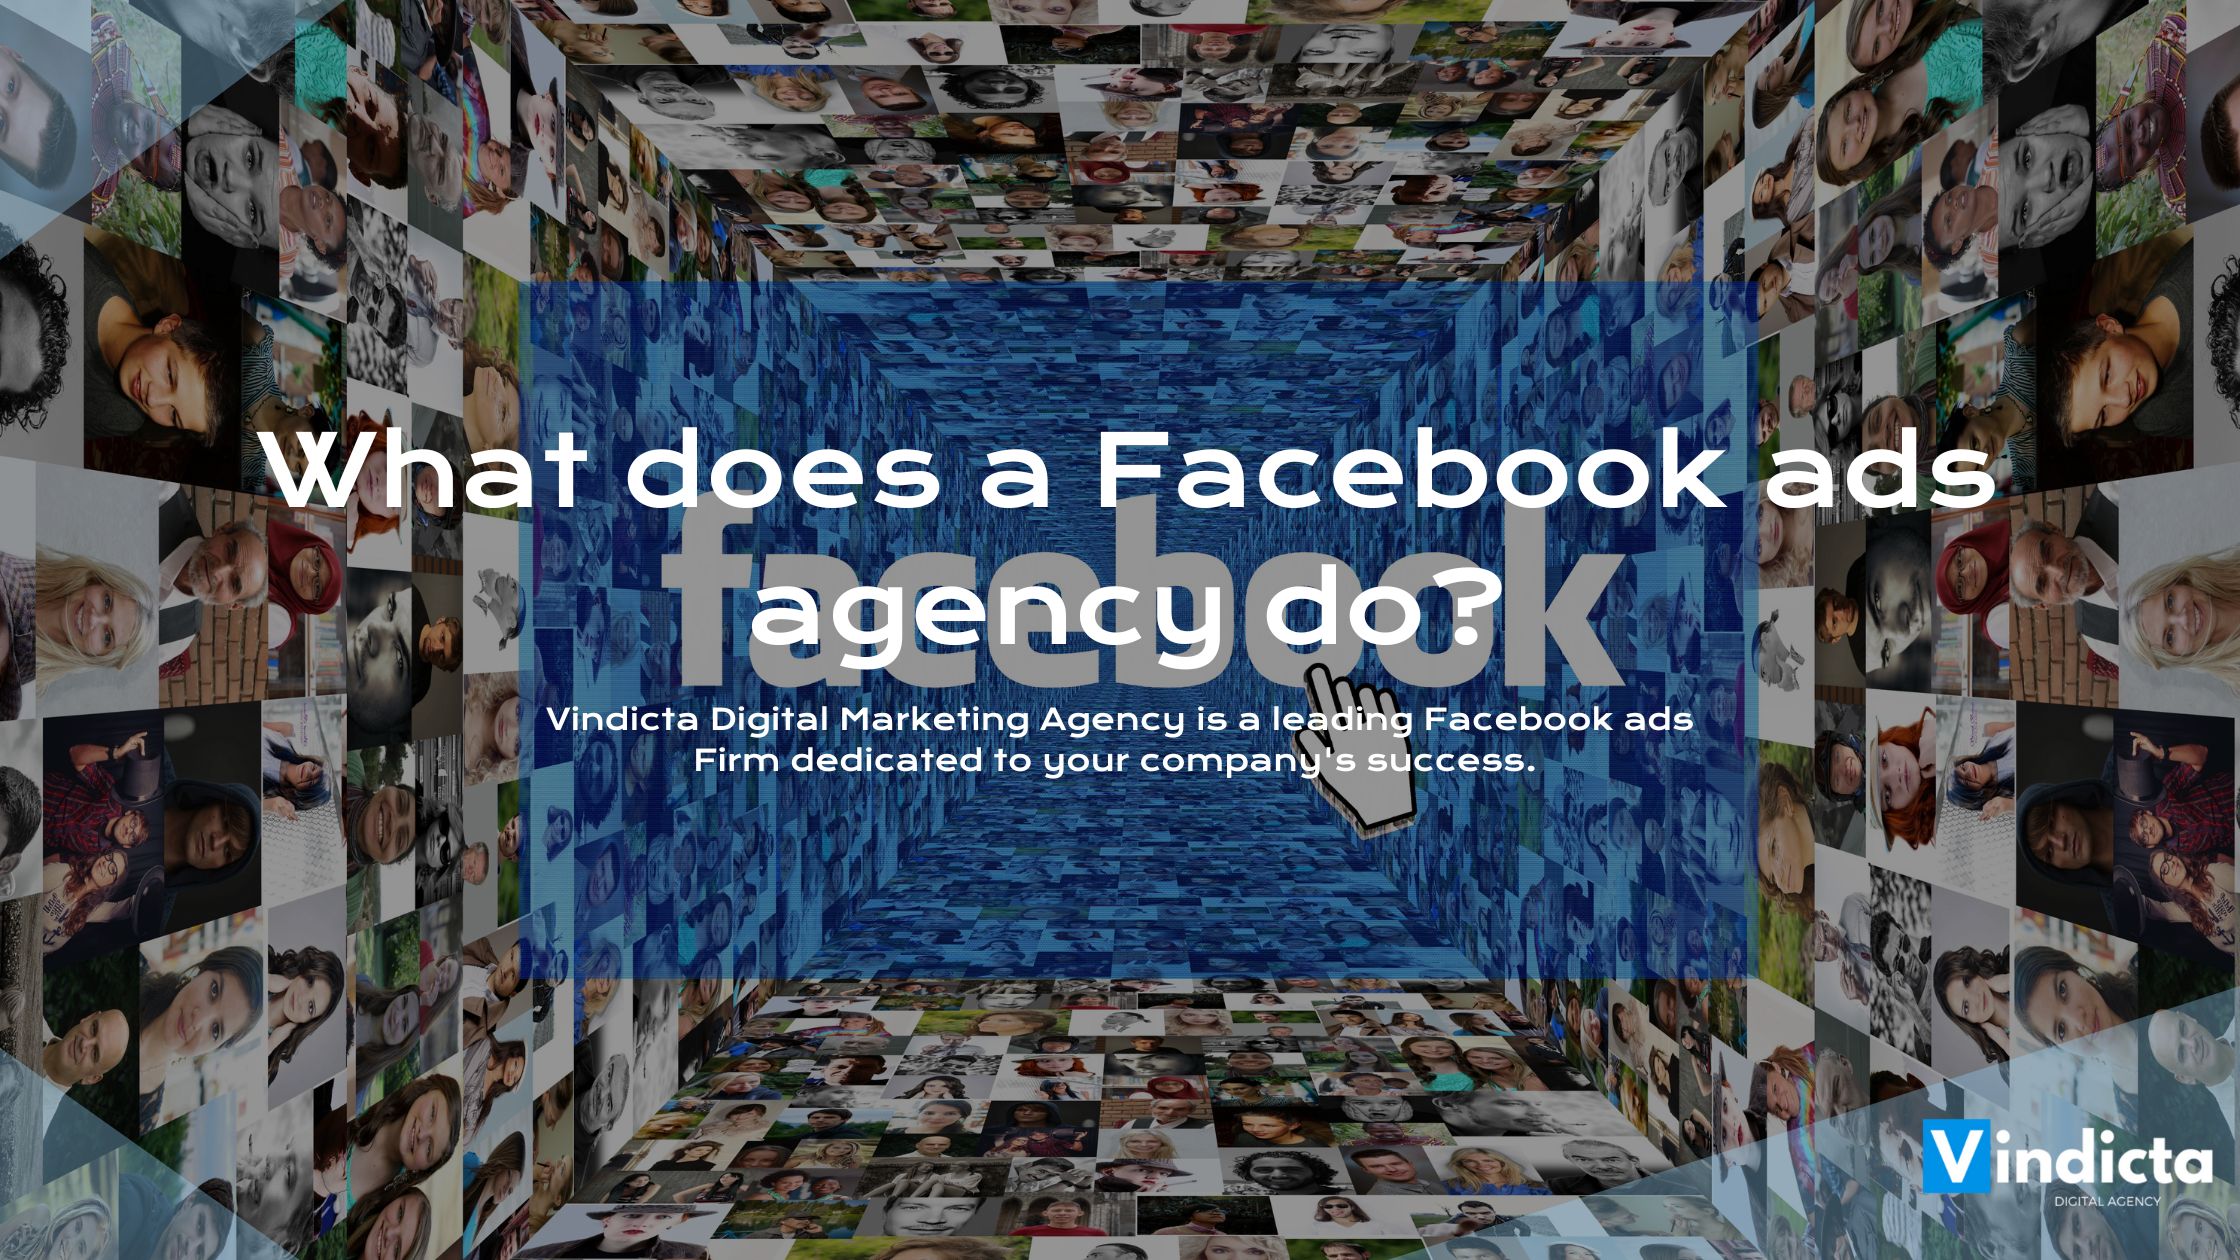 What does a Facebook ads agency do?